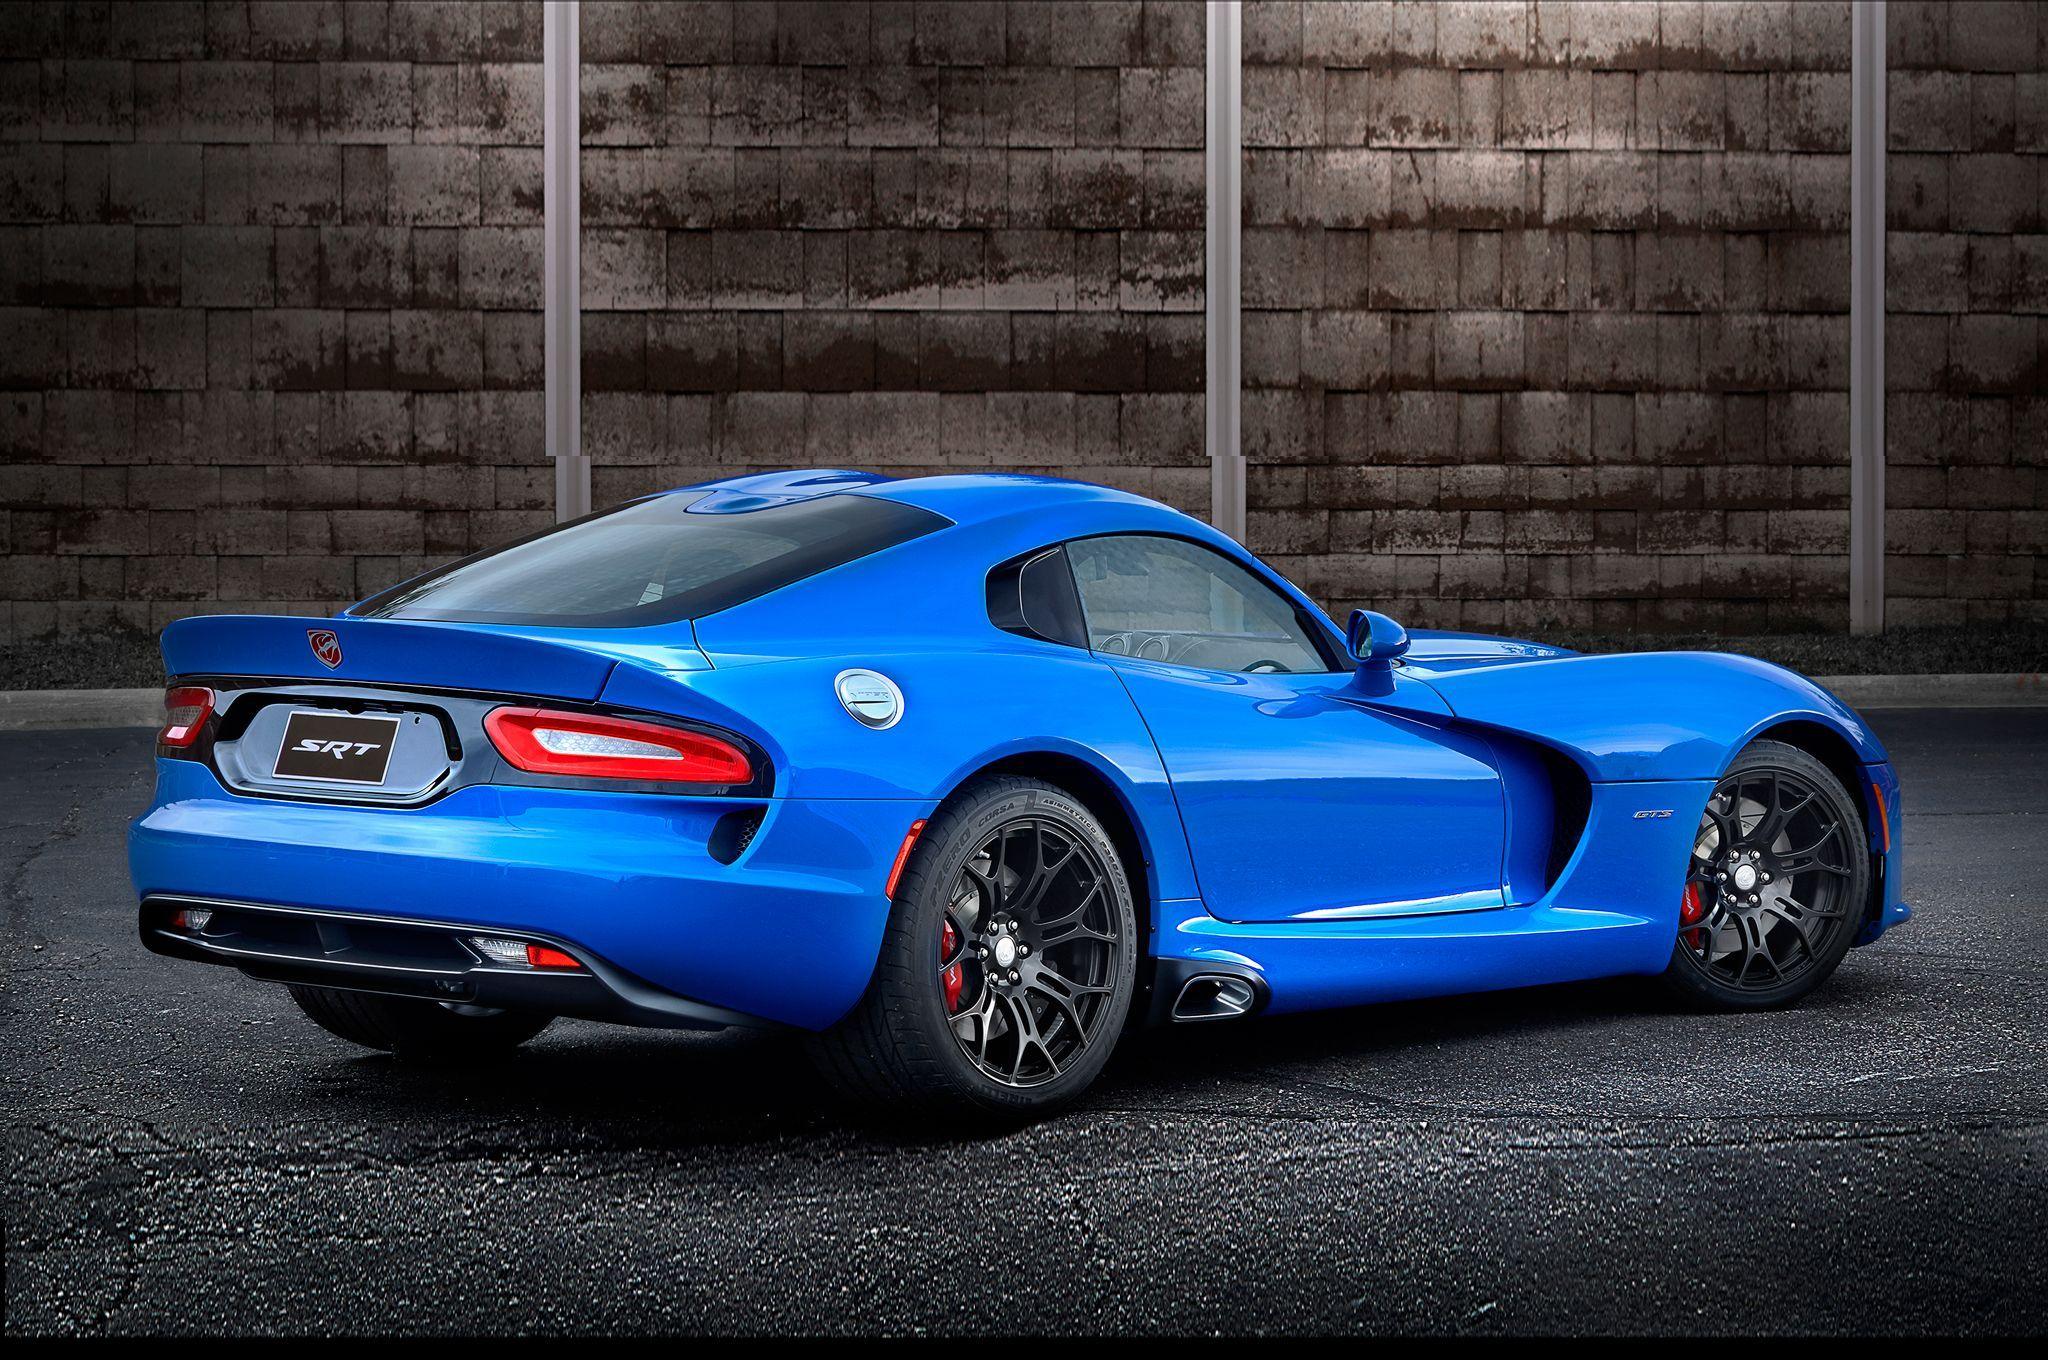 Dodge Viper 2016 Gts Background Wallpaper About Gallery Car